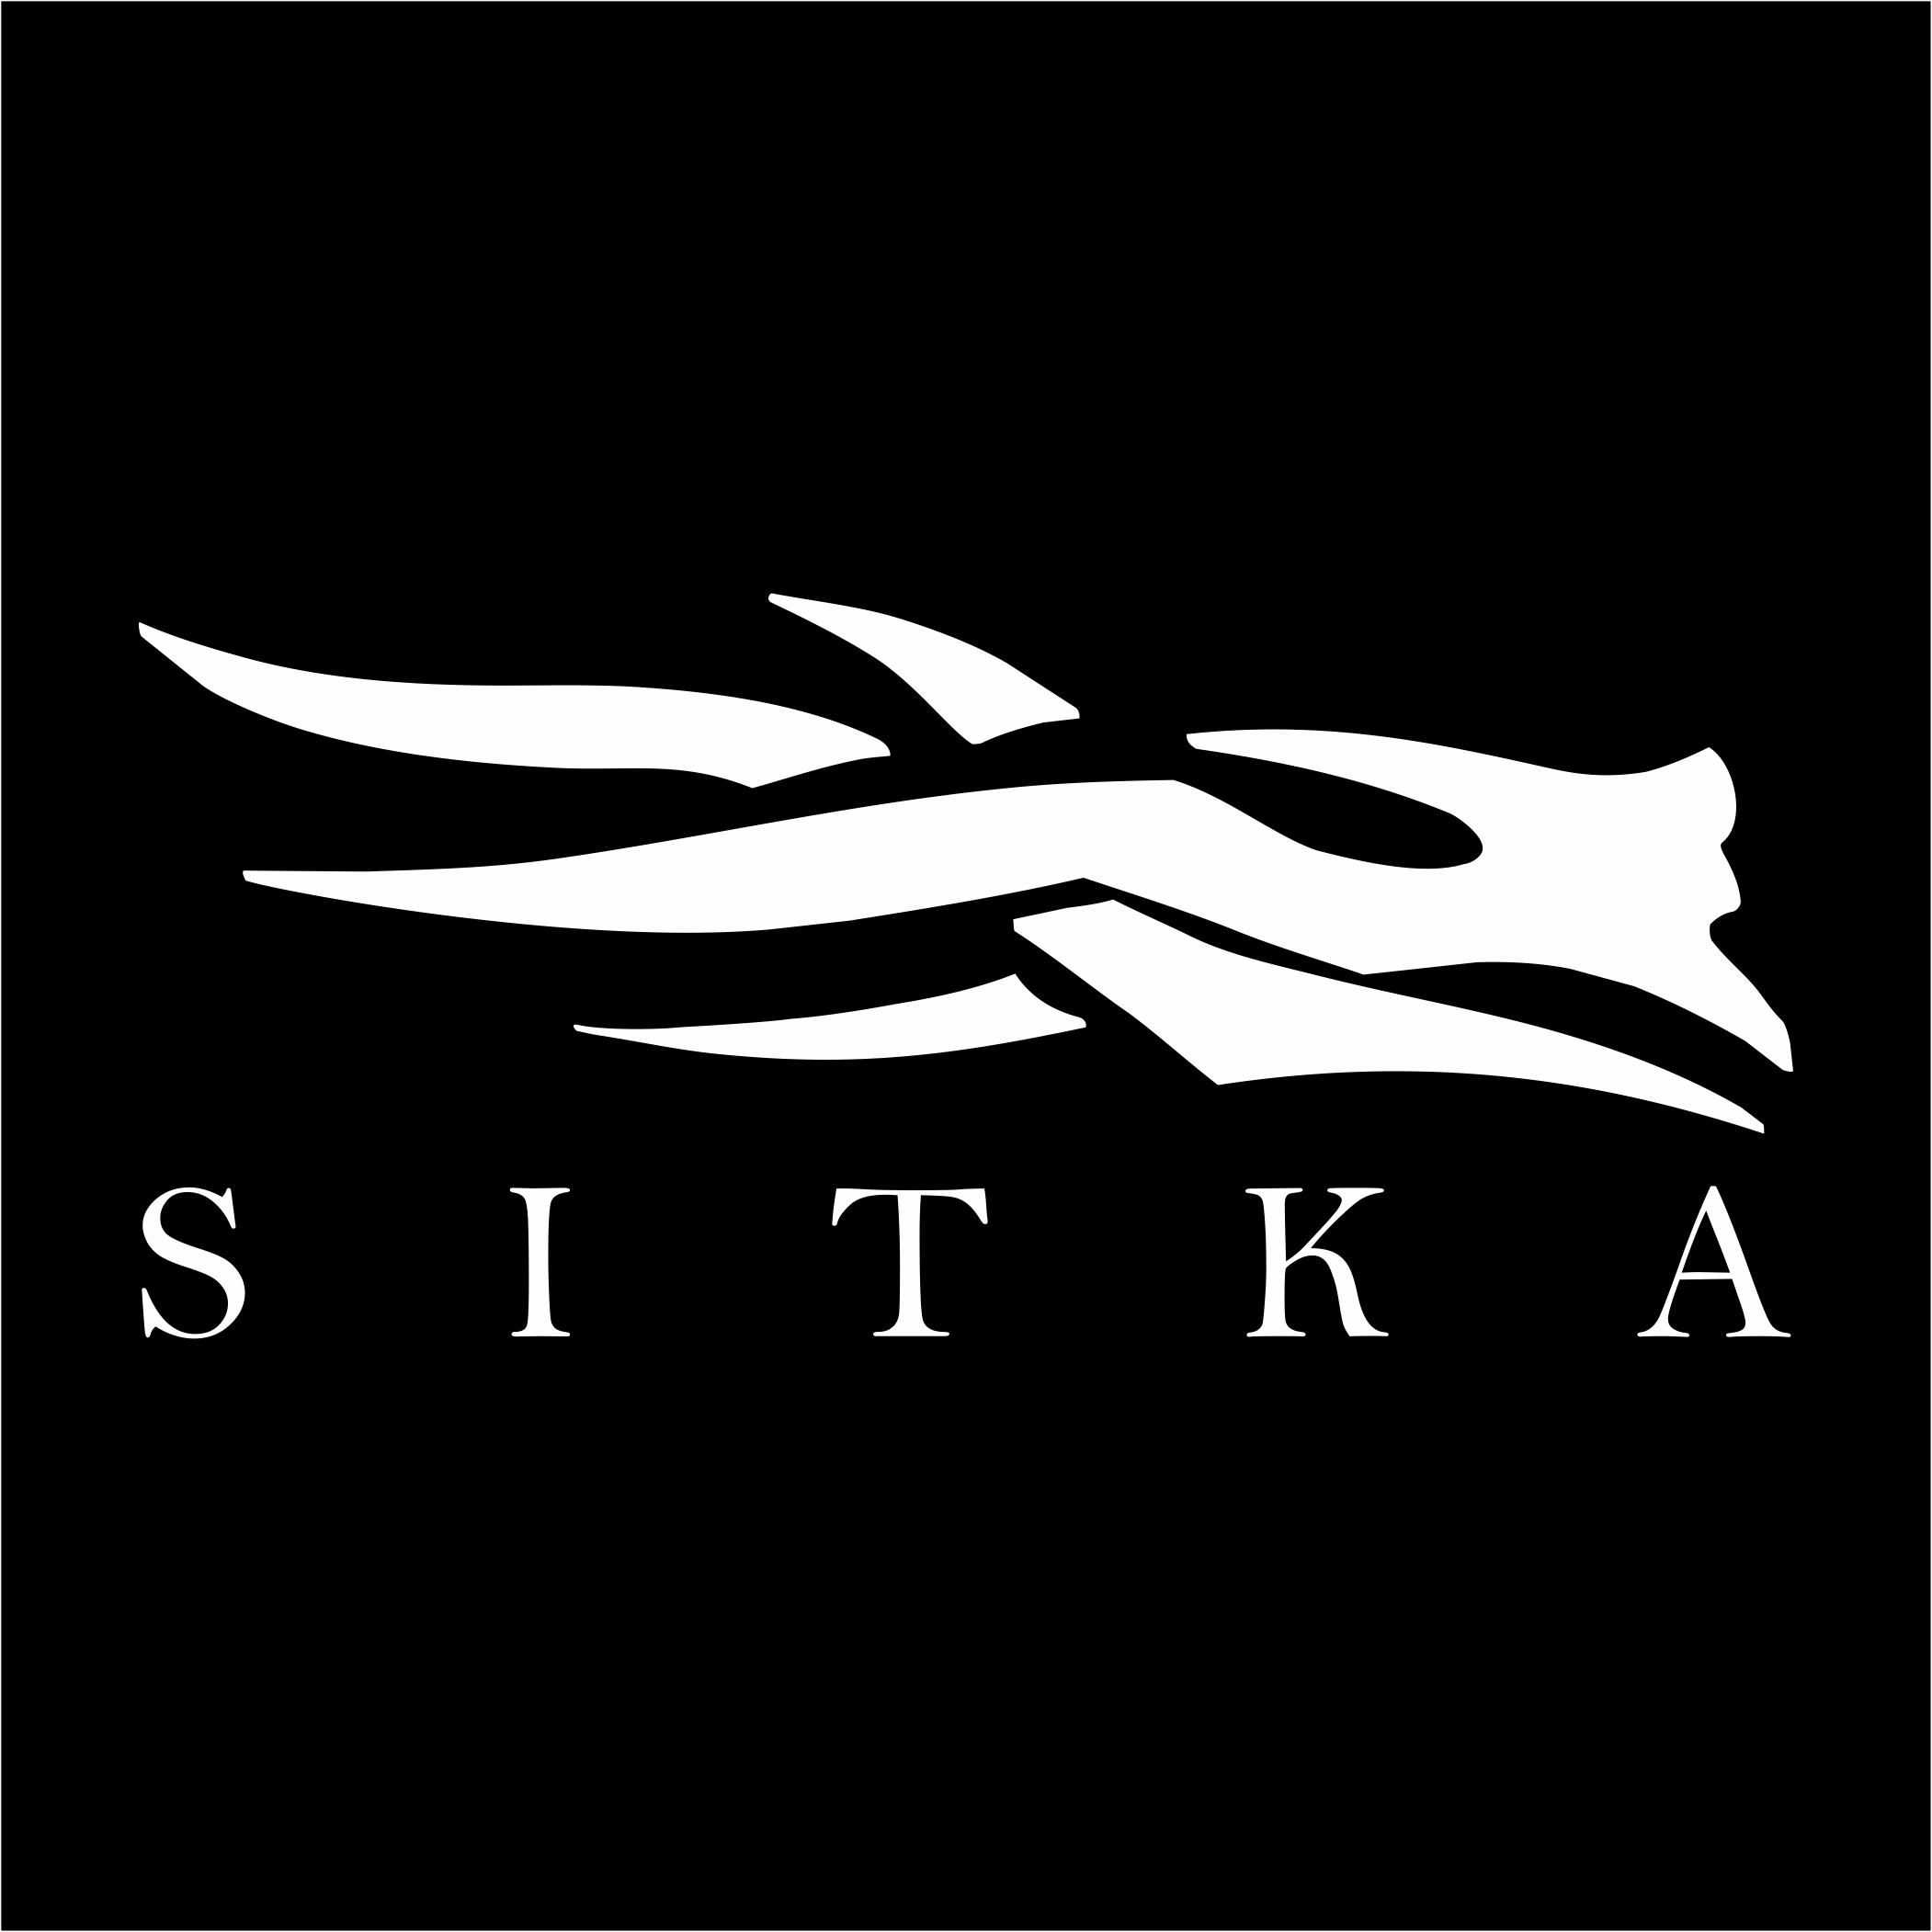 Sitka Logo With Text Decal Sticker 